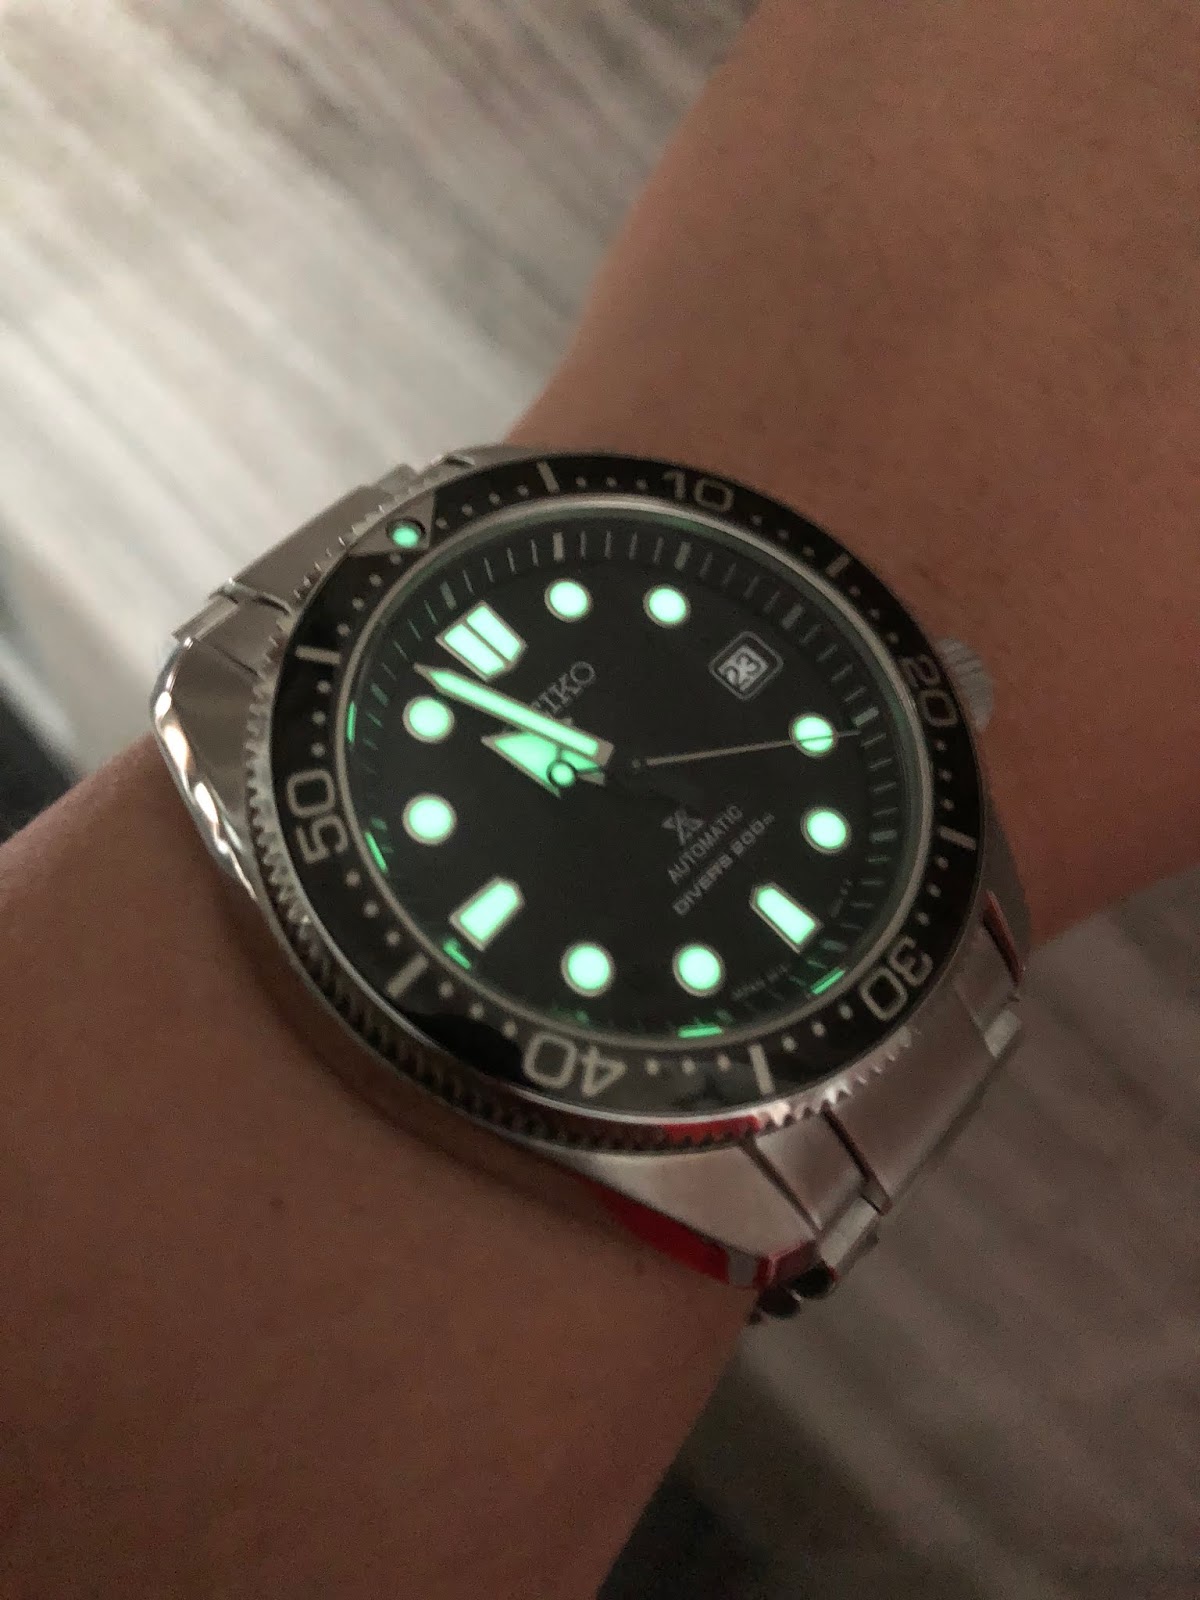 My Eastern Watch Collection: Seiko Prospex JDM Baby Marinemaster 200 Meter  Diver SBDC061 (similar to SBDC063 or SPB077/SPB079) - Similar to a Seiko  Sumo, A Review (plus Video)